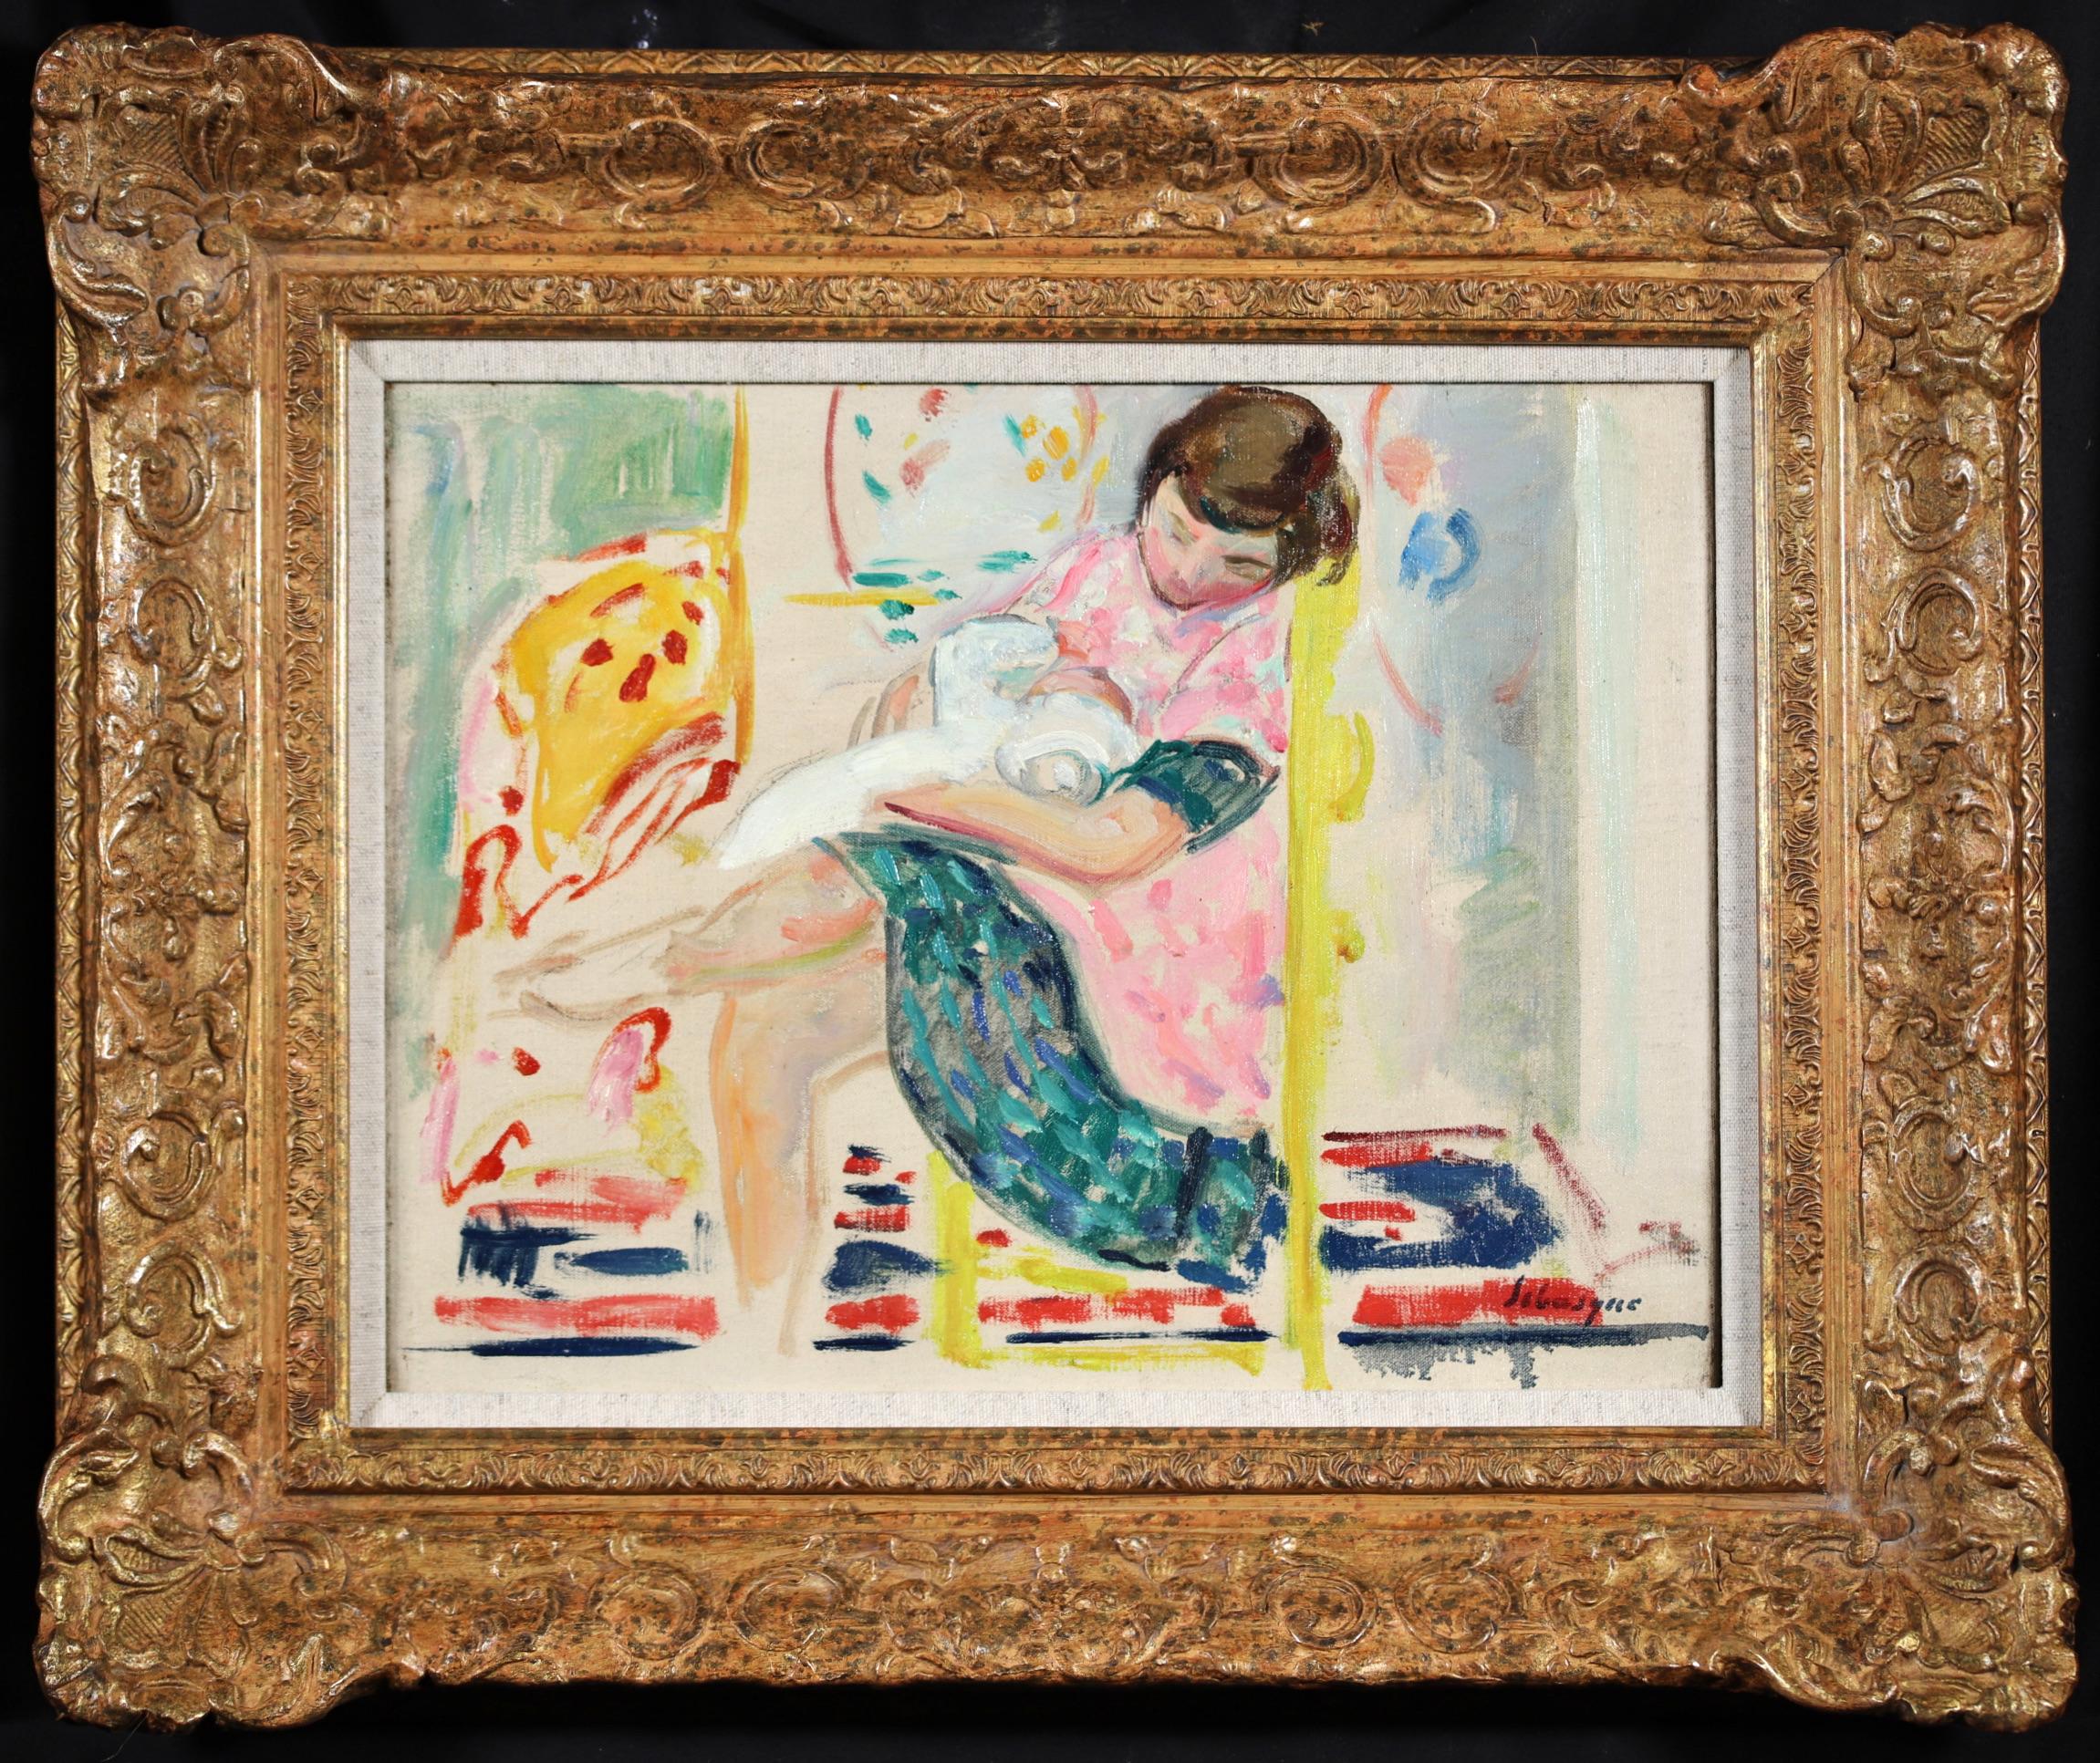 Signed figurative oil on canvas circa 1910 by French post impressionist painter Henri Lebasque. The work depicts a mother seated on a yellow change feeding her young baby.

Signature:
Signed lower right

Dimensions:
Framed: 16"x19"
Unframed: